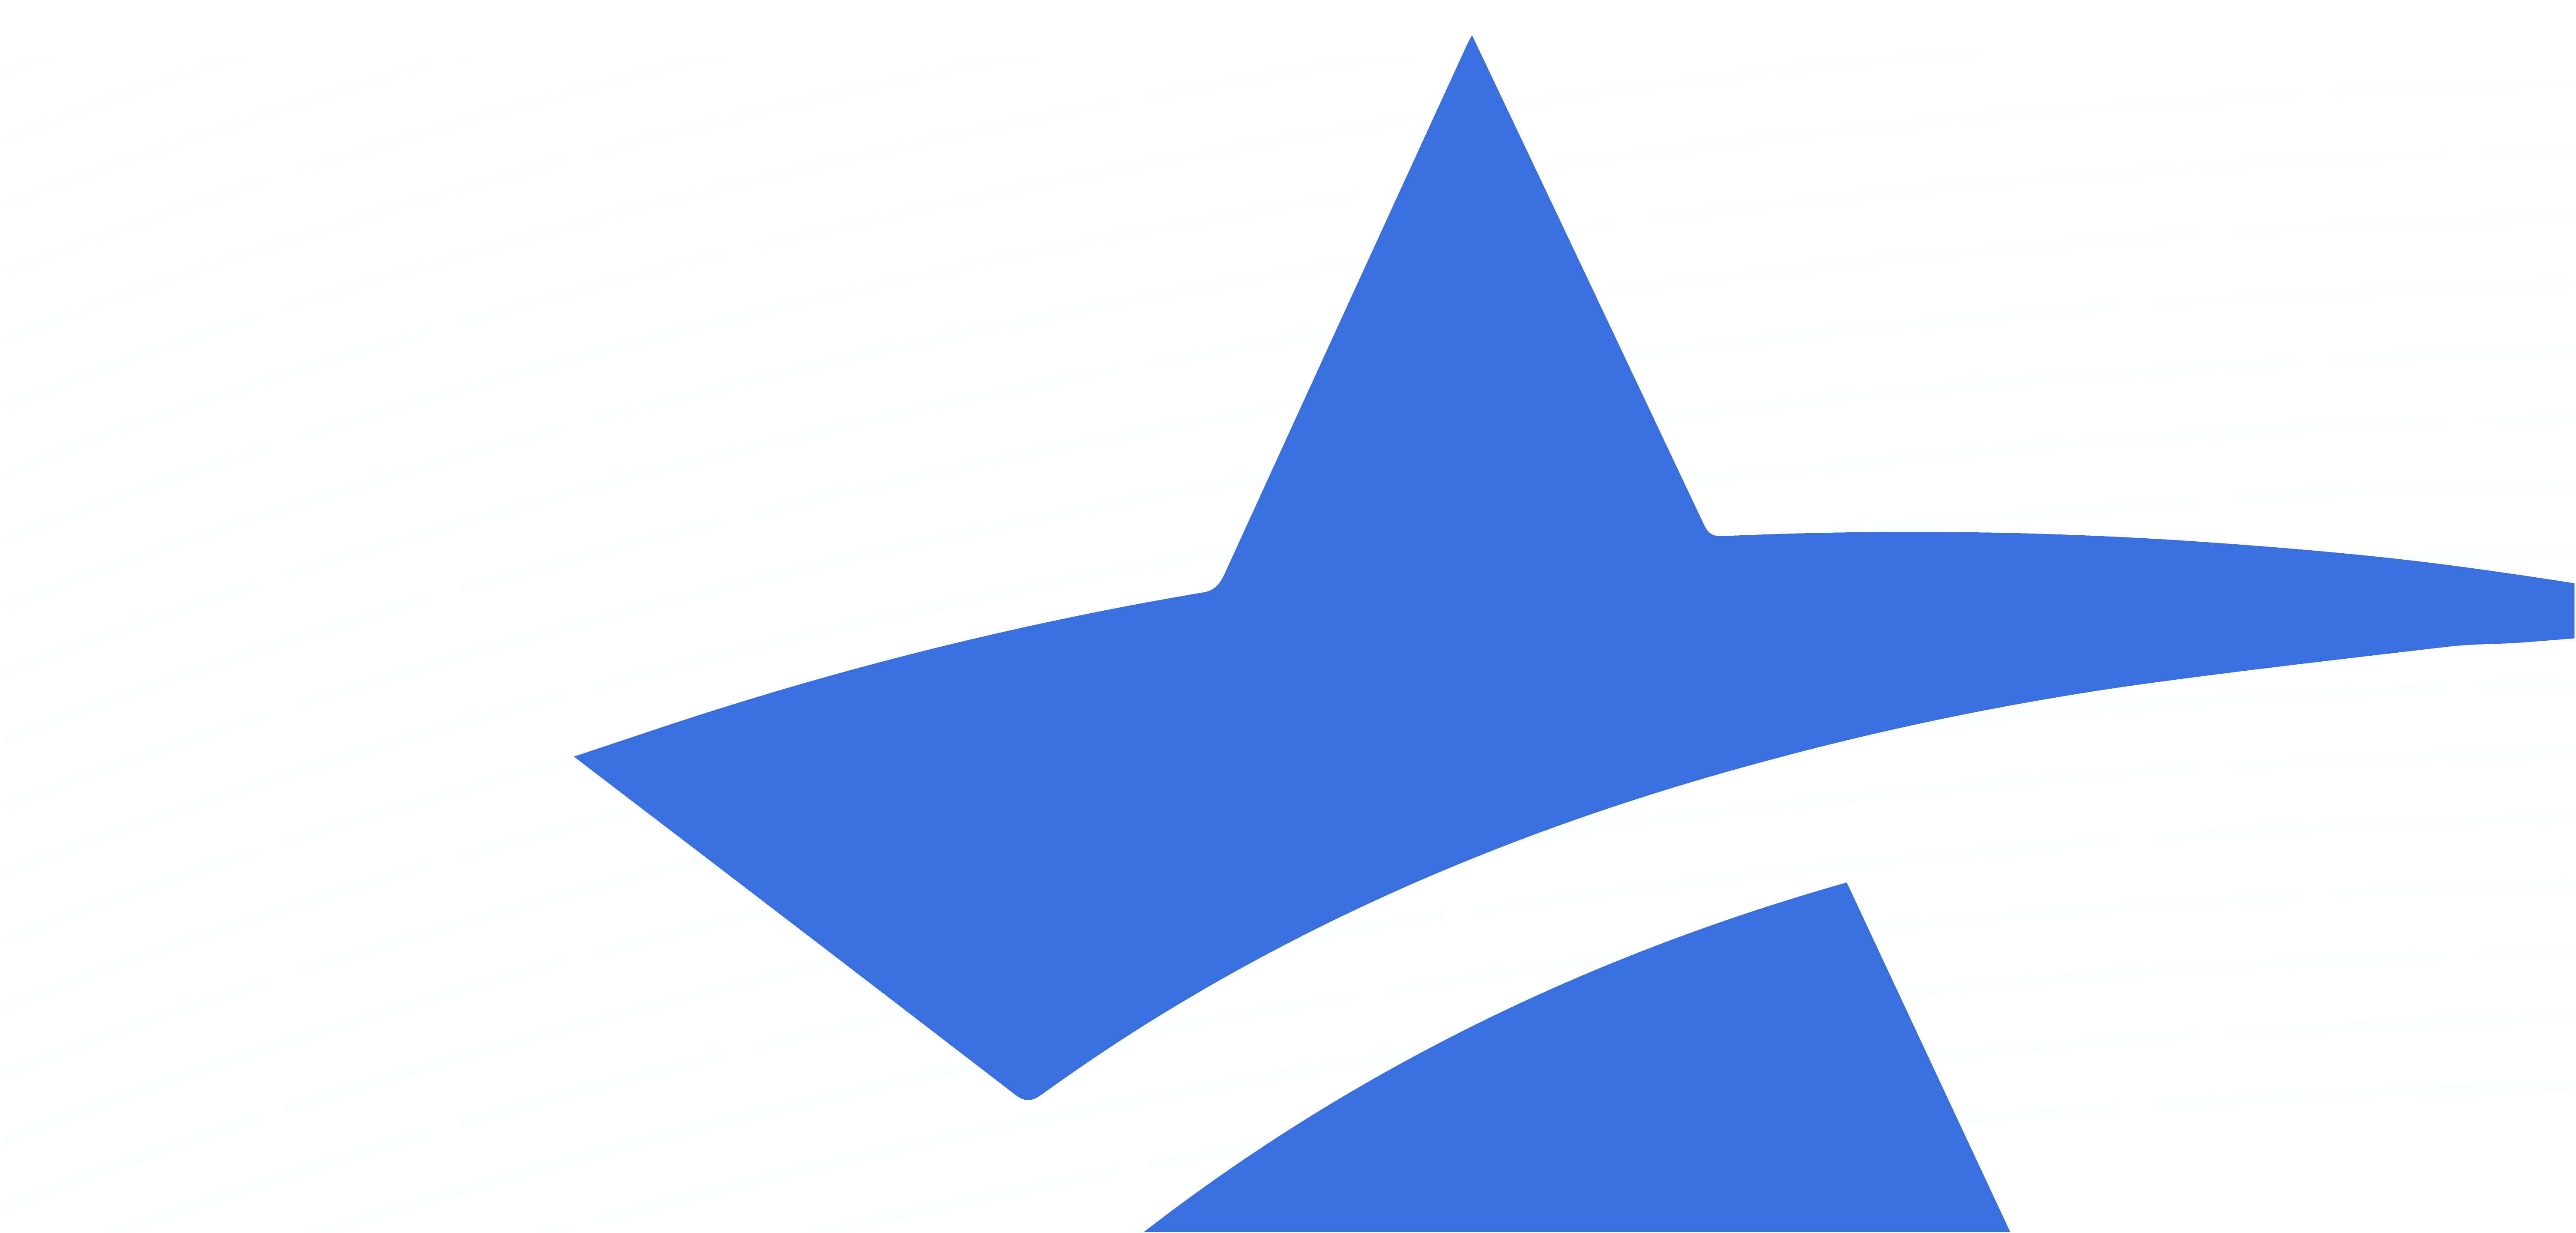 Landing Hero Blue Star Filled With Texture